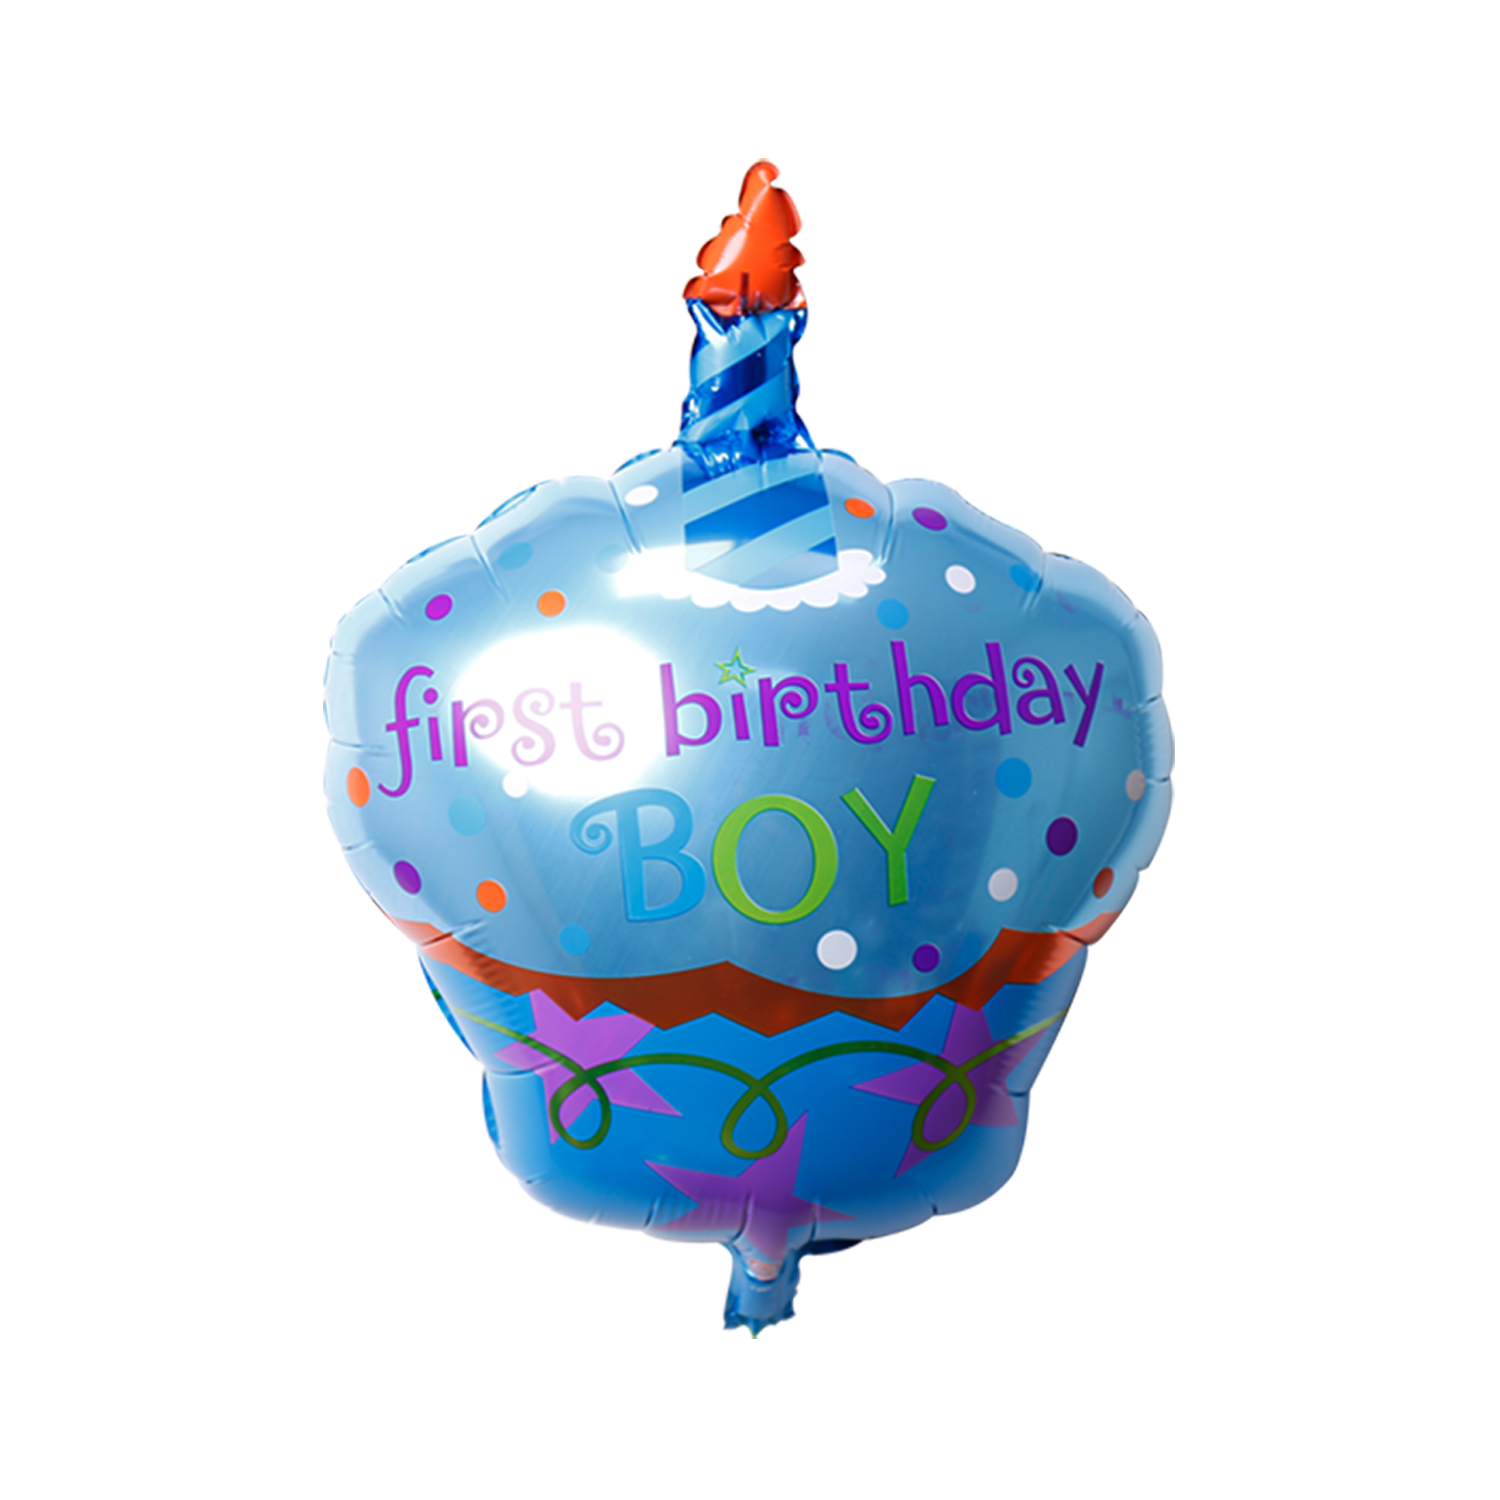 First Birthday Boy Cupcake balloons delivery in Dubai